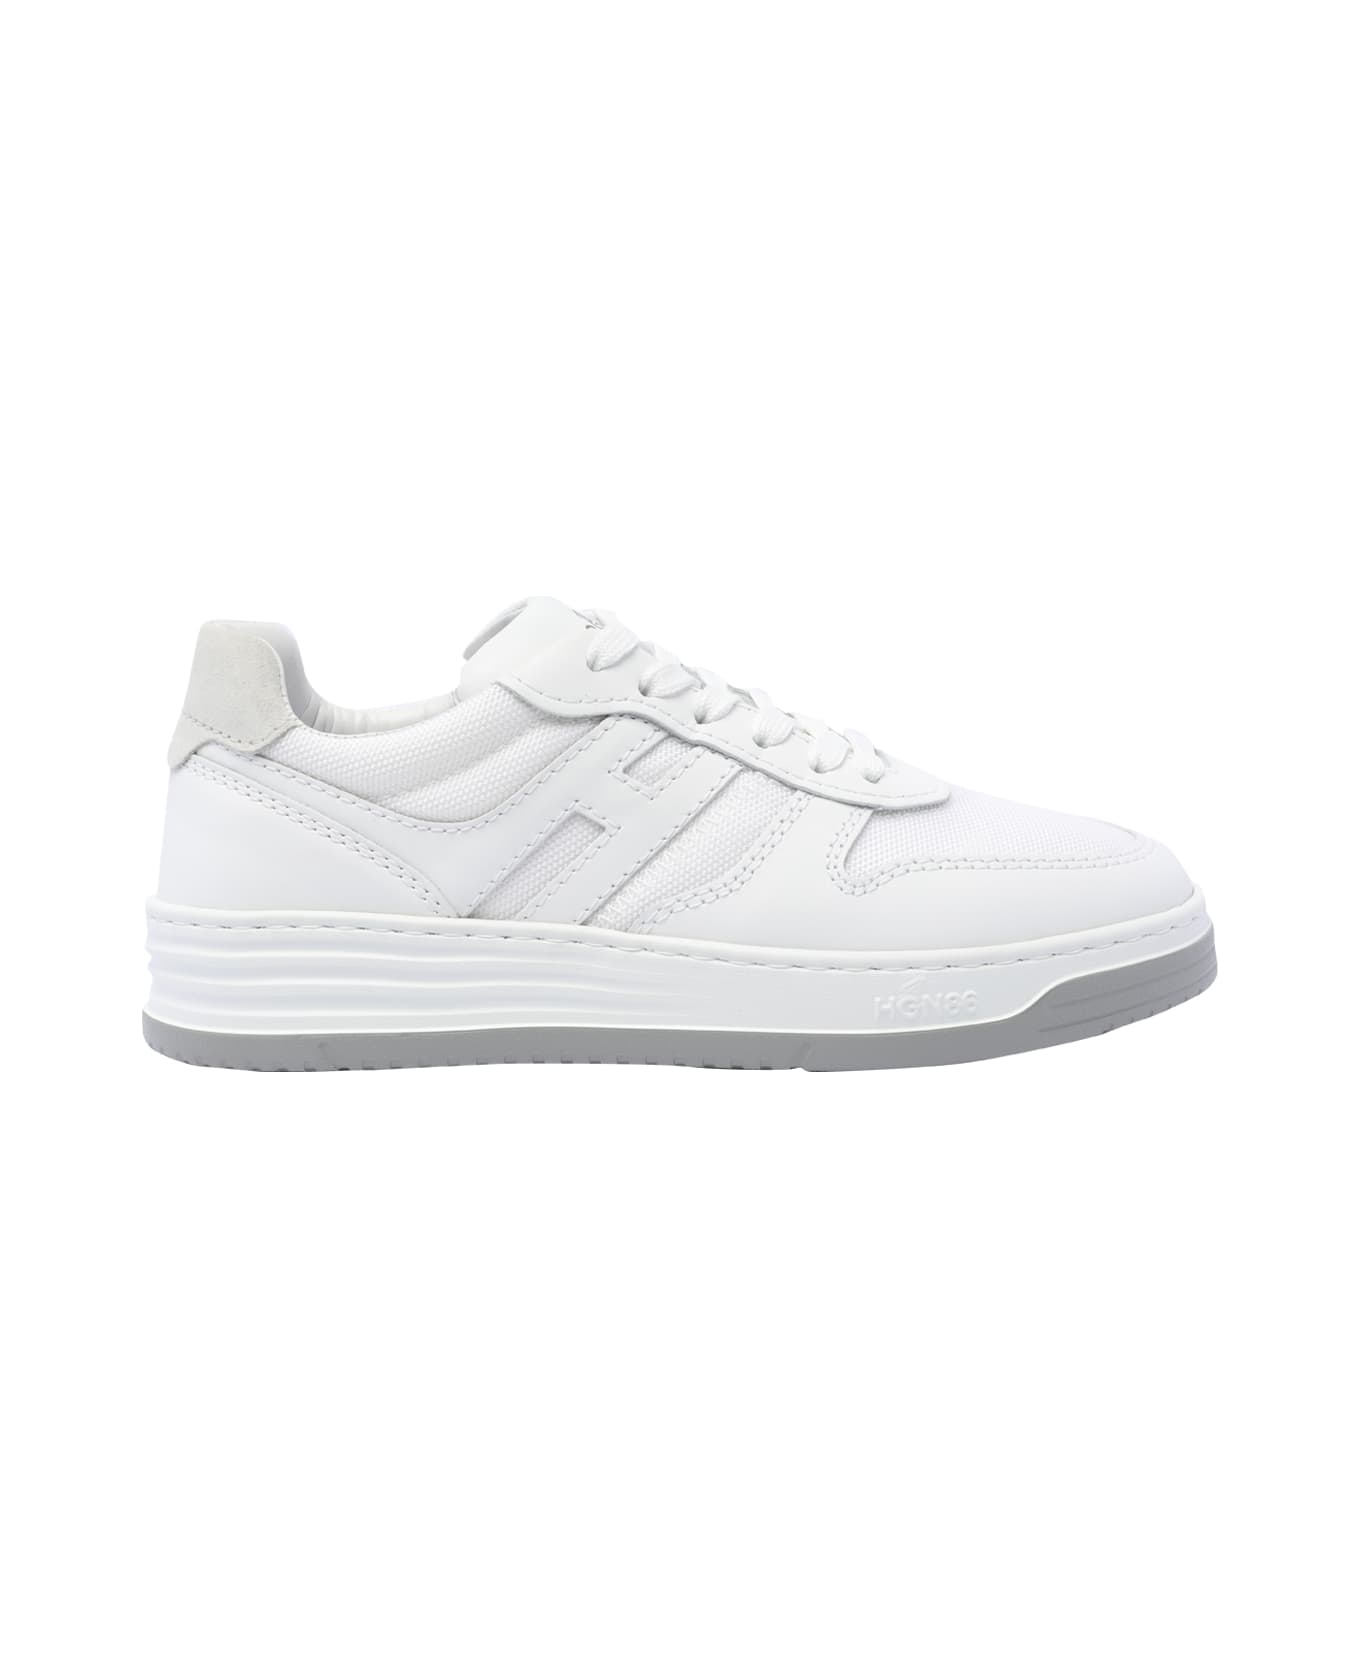 Hogan H630 Panelled Low-top Sneakers - White スニーカー